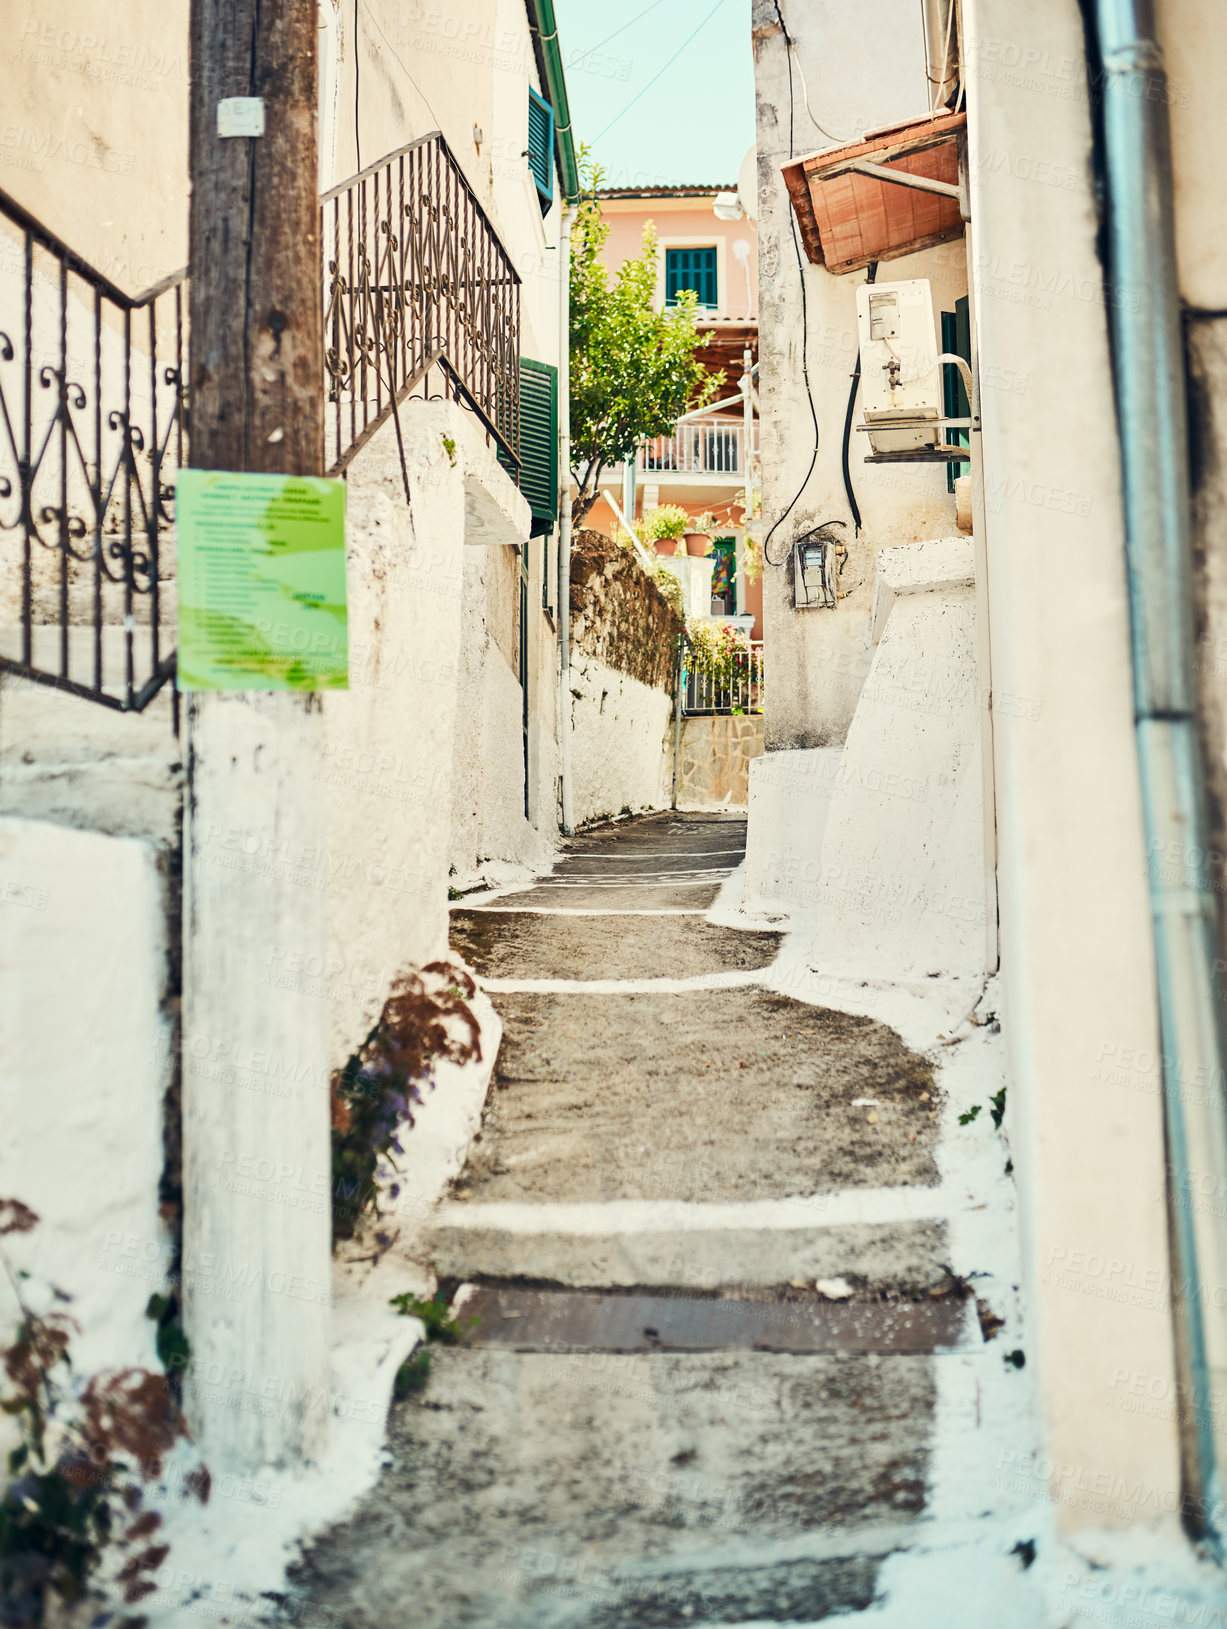 Buy stock photo Shot of steps in between buildings in an ancient, foreign city